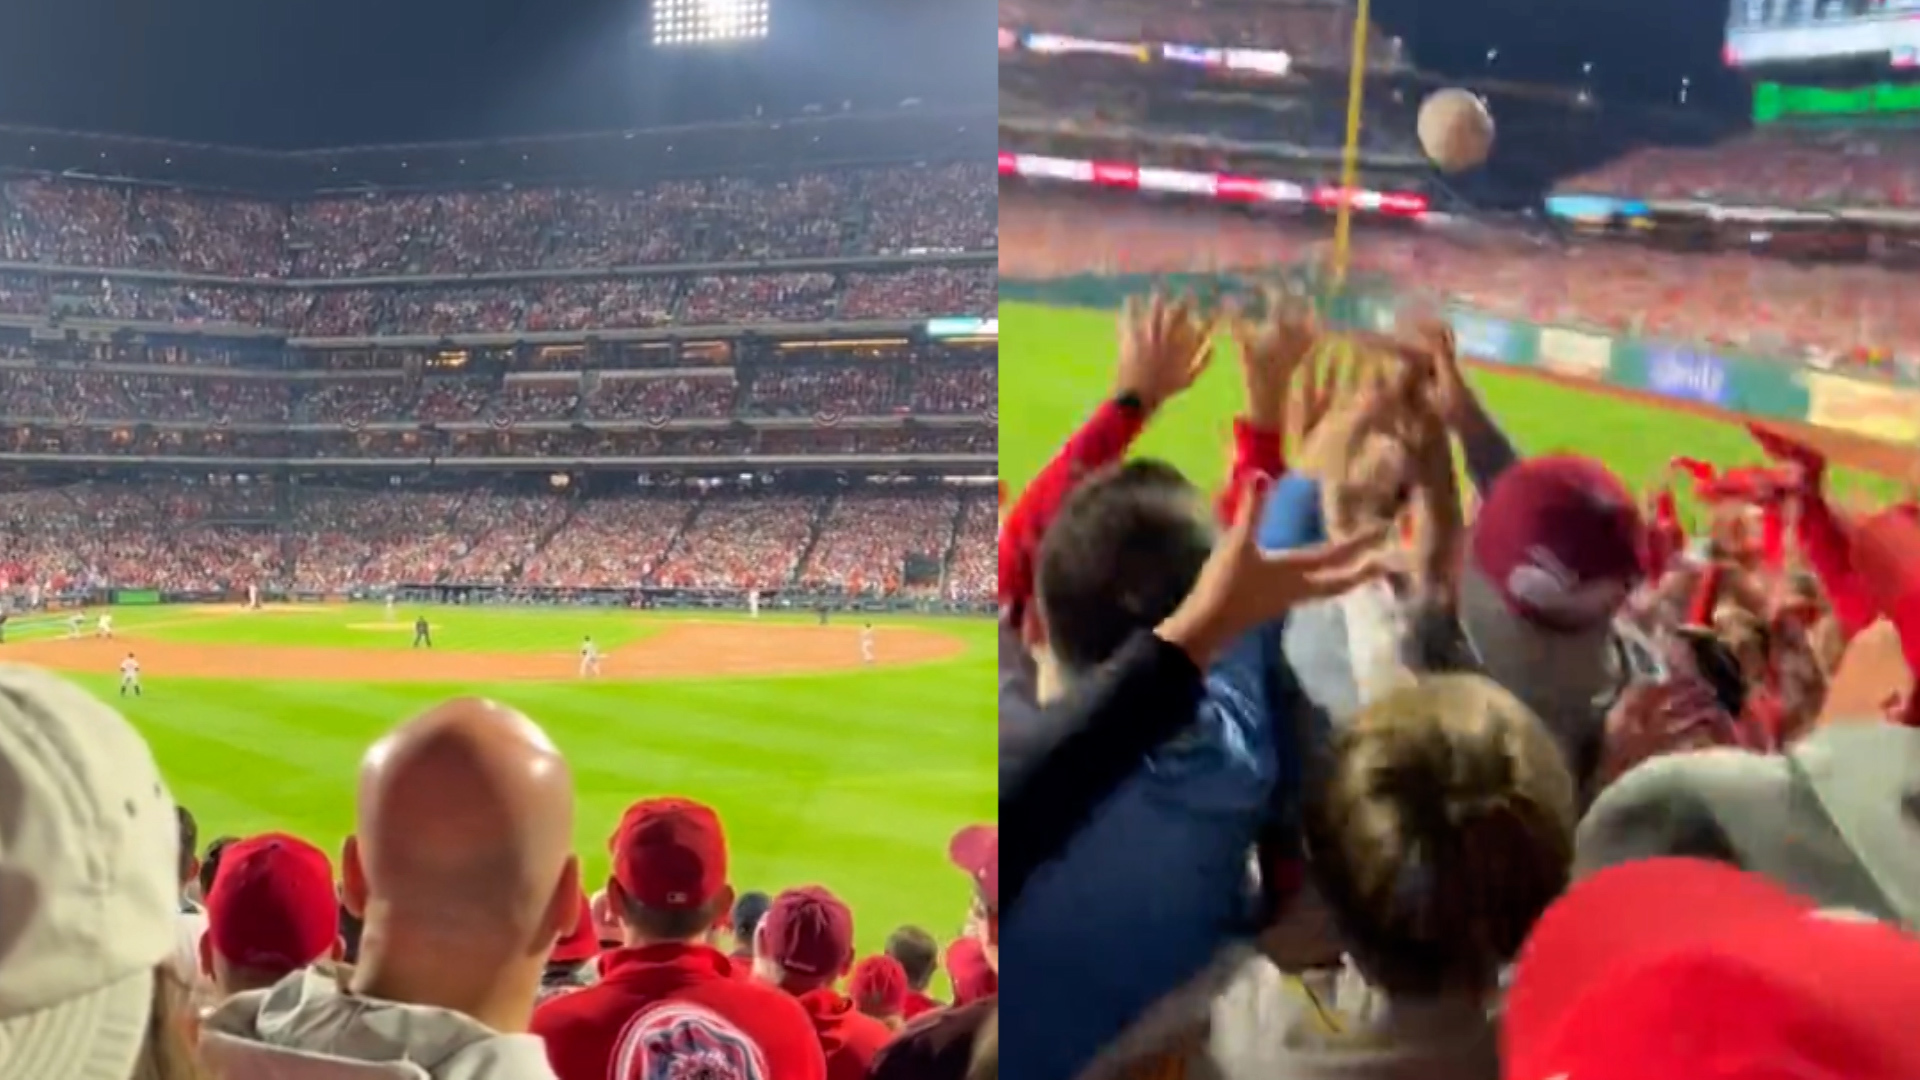 Bryce Harper's unbelievable home run caught on camera against the Houston Astros